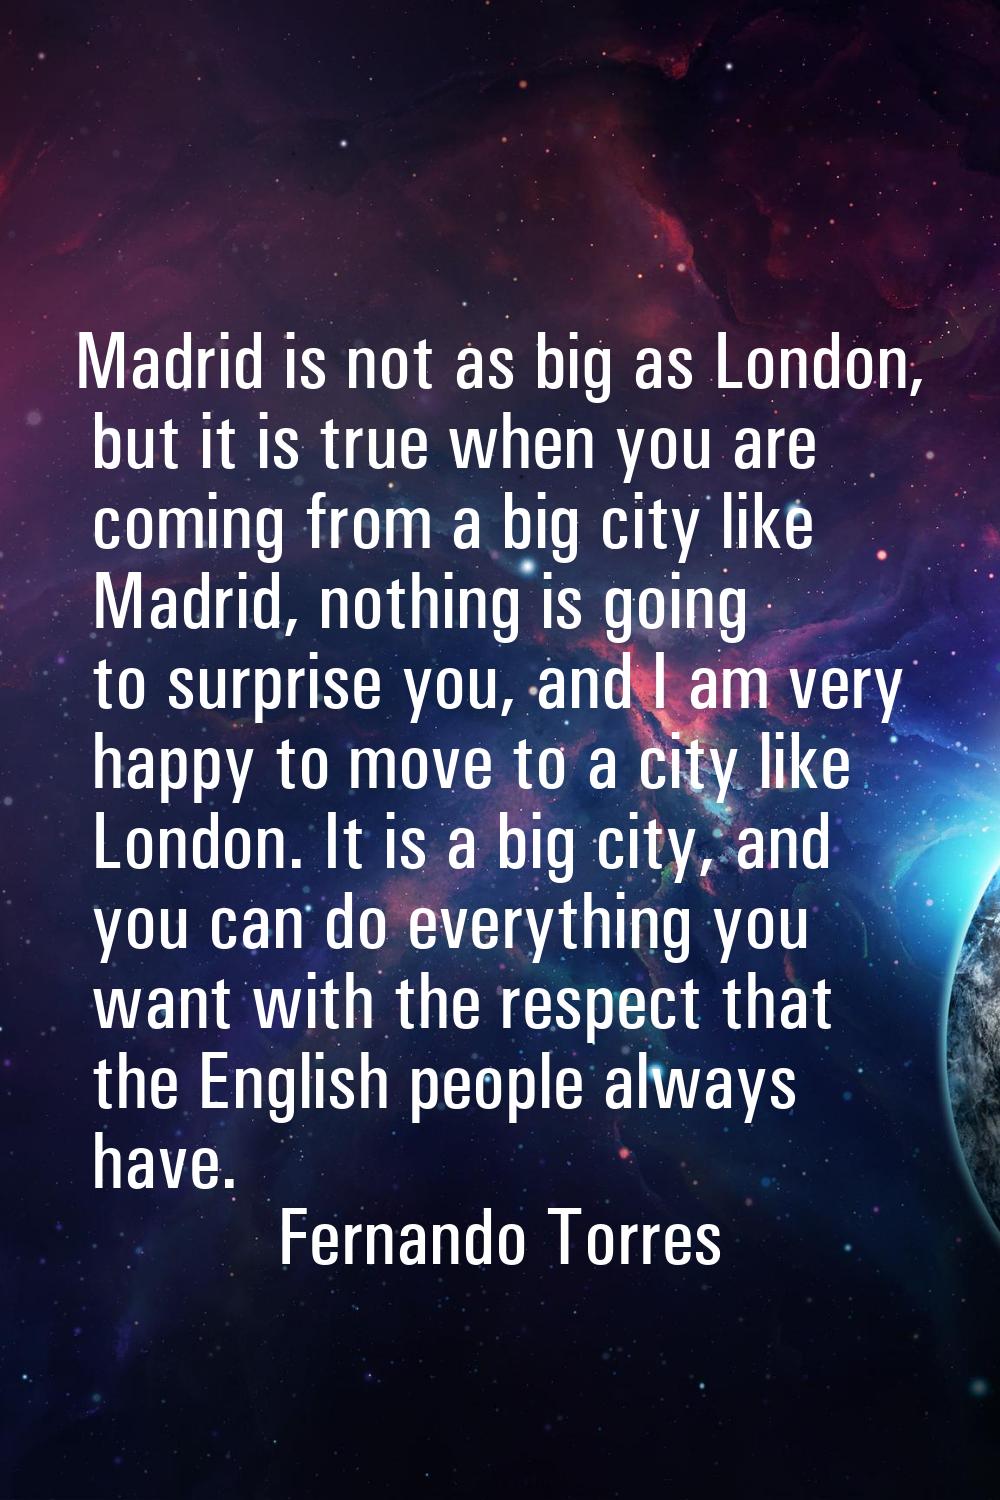 Madrid is not as big as London, but it is true when you are coming from a big city like Madrid, not